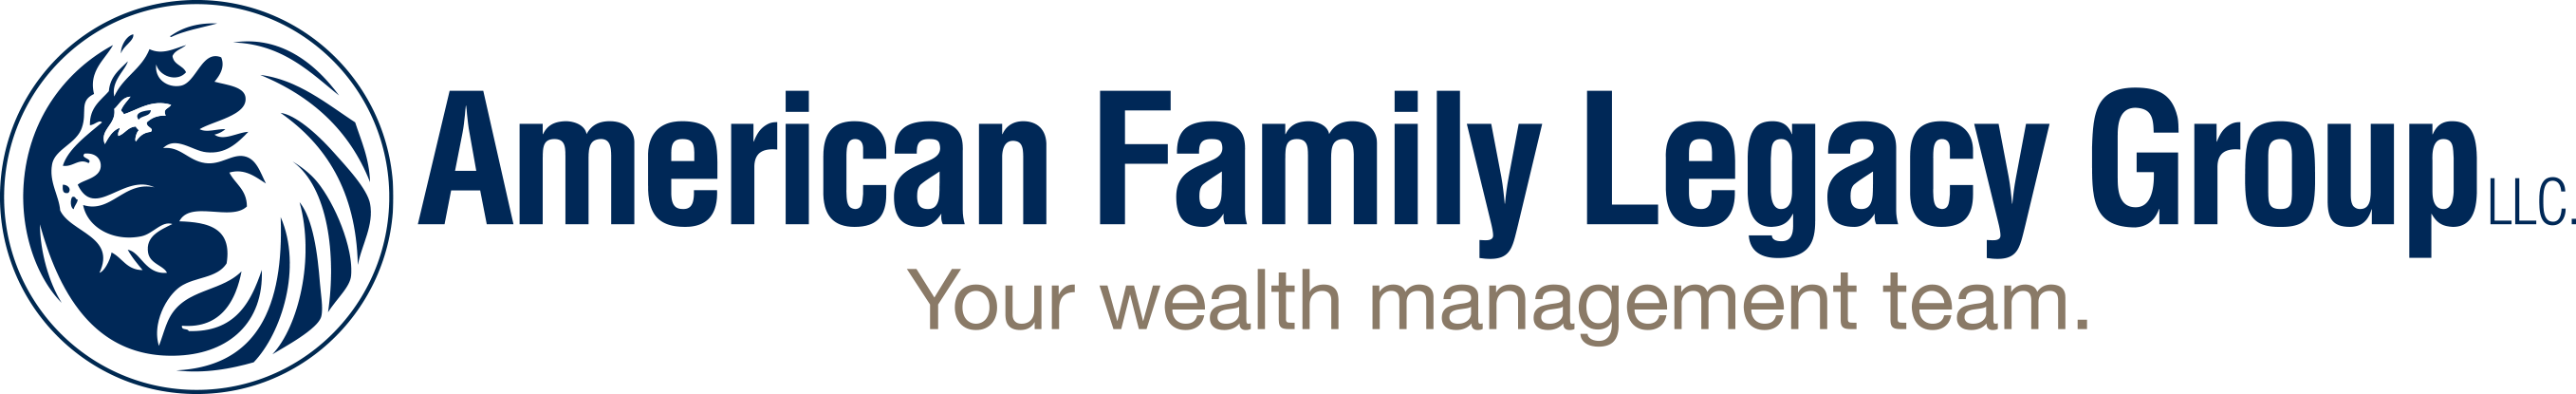 American Family Legacy Group